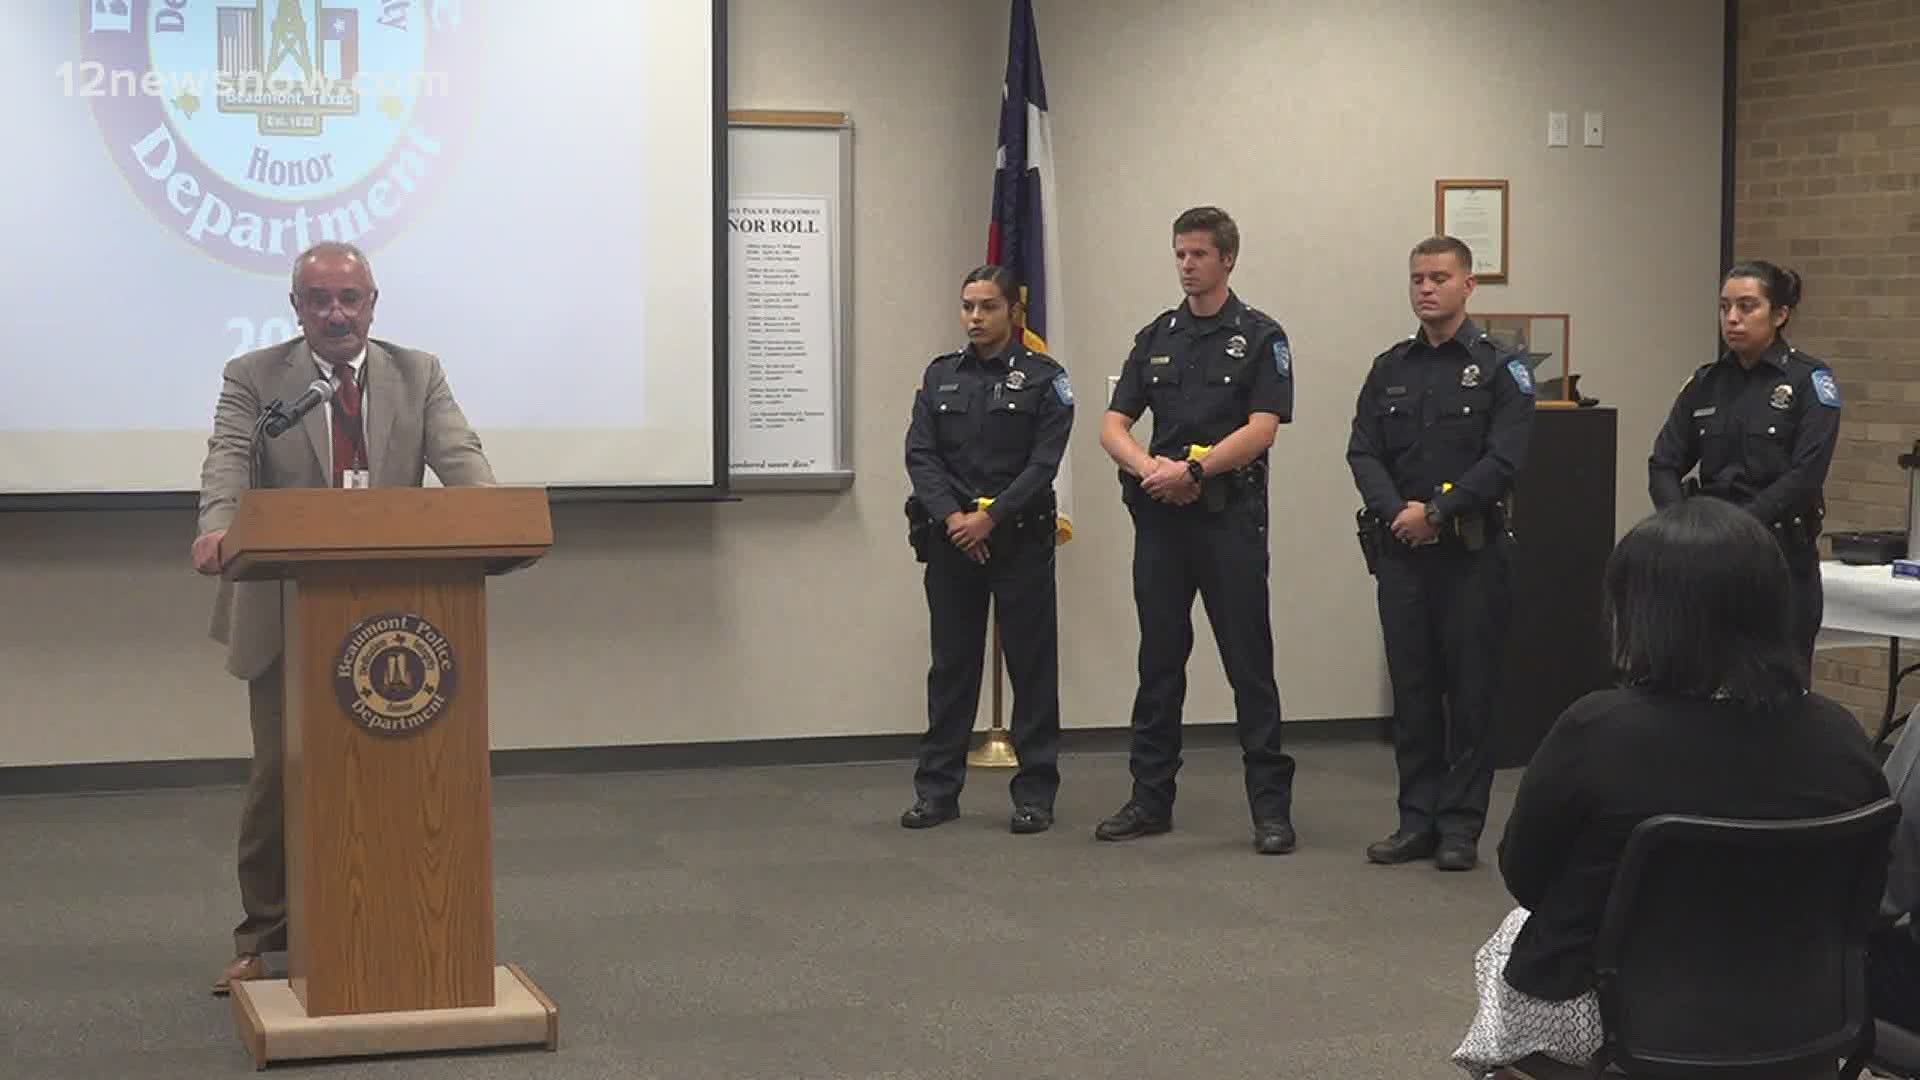 Beaumont Police Swears In Four New Officers In Aug 2020